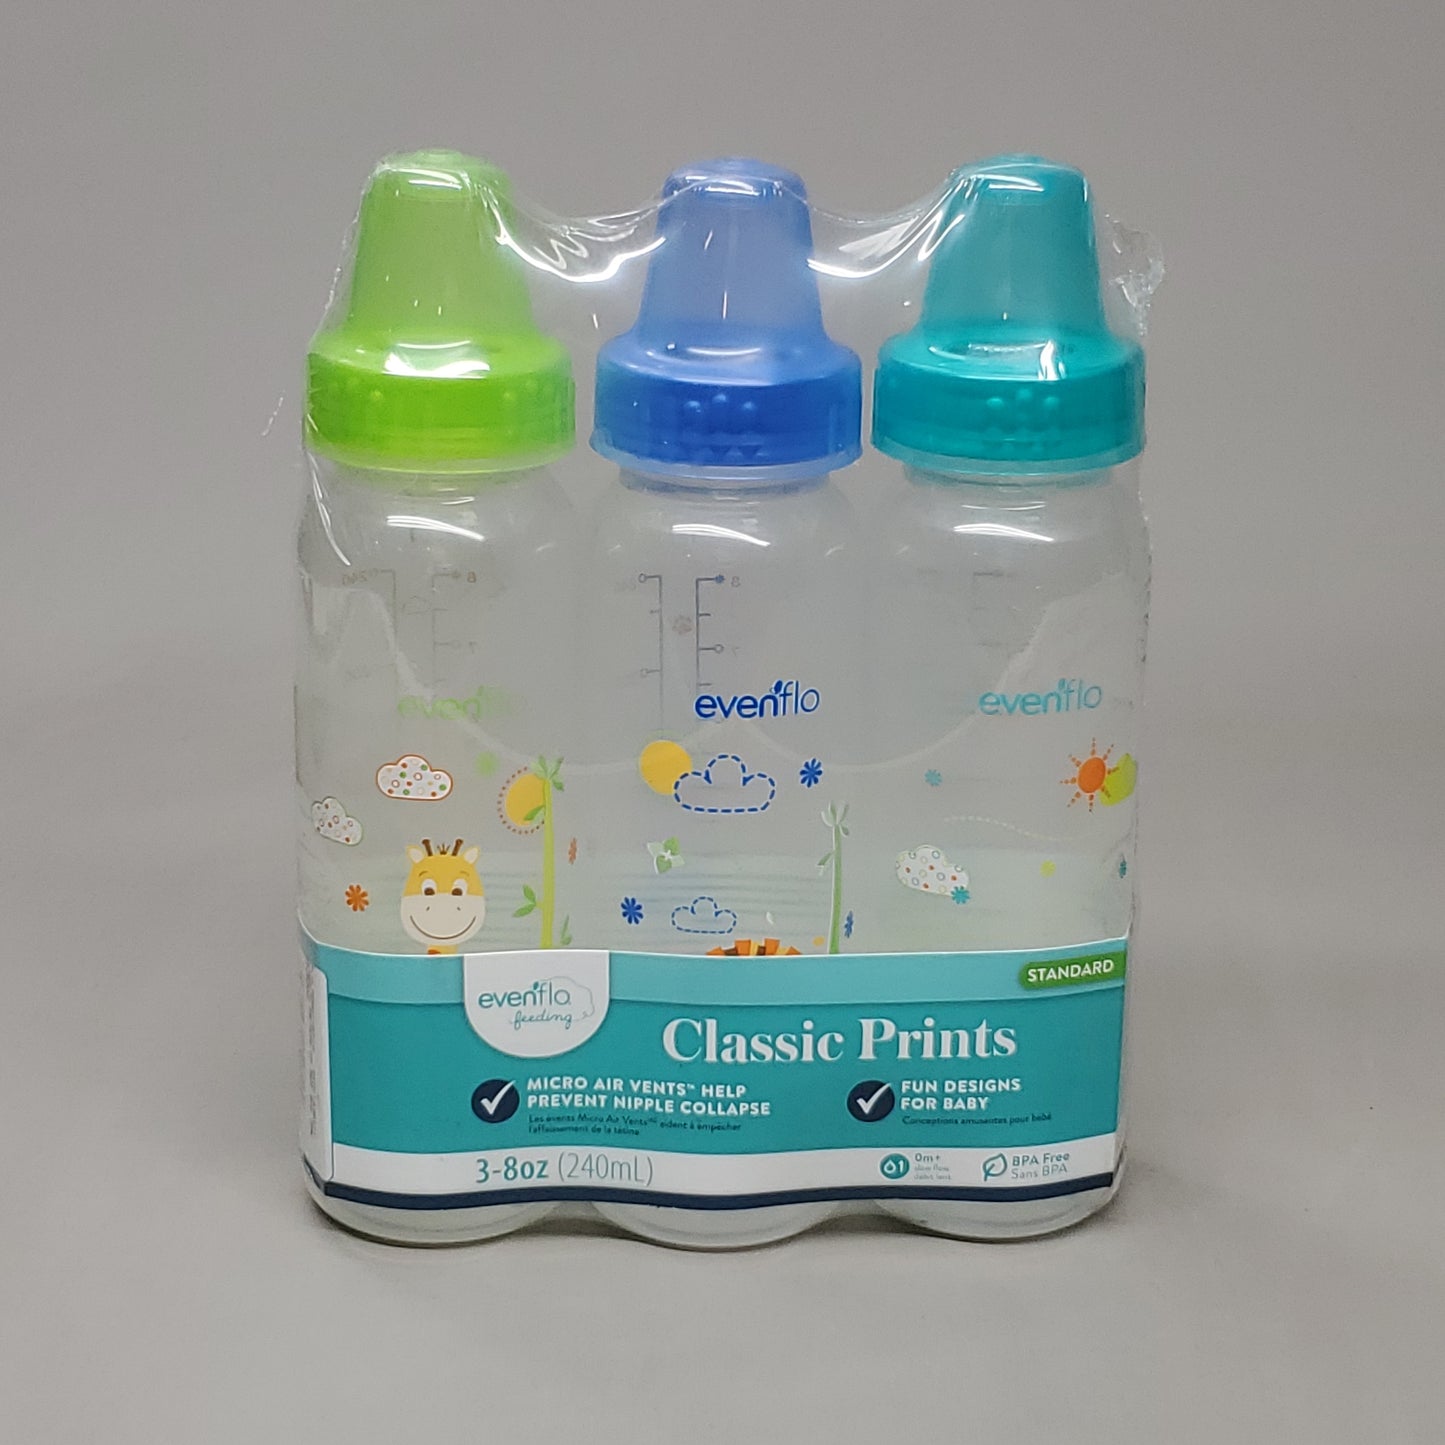 EVENFLO 3-PACK Of Classic Prints Fun Design Standard Baby Bottles 8 oz 3 Colors Blue/Green 1338311 (New)